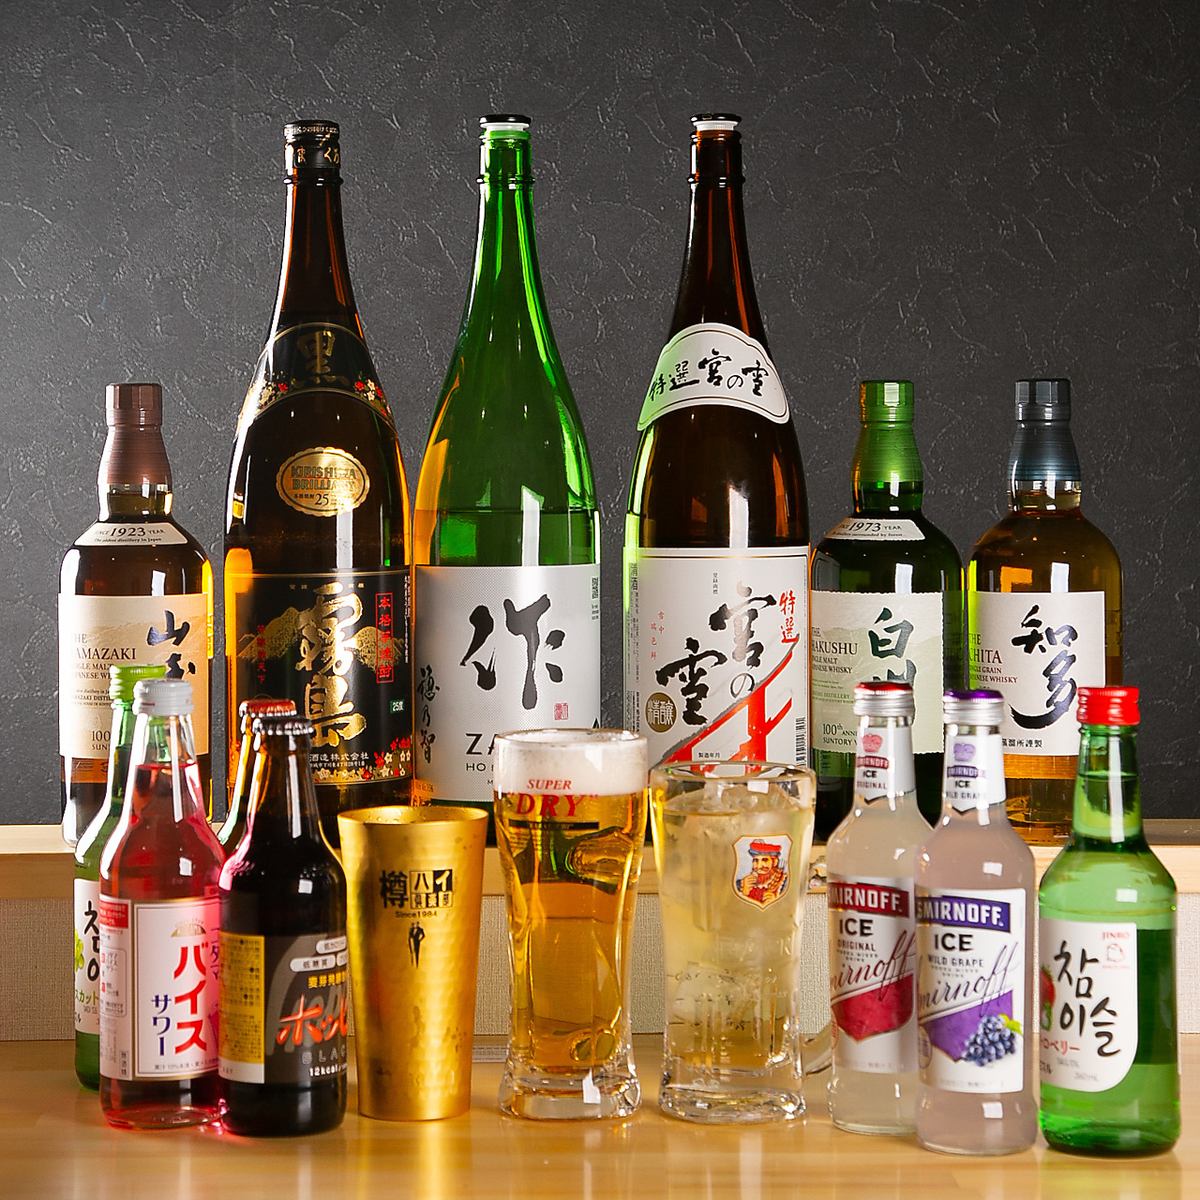 Self-service all-you-can-drink shochu and whiskey served from the tap for 880 yen☆